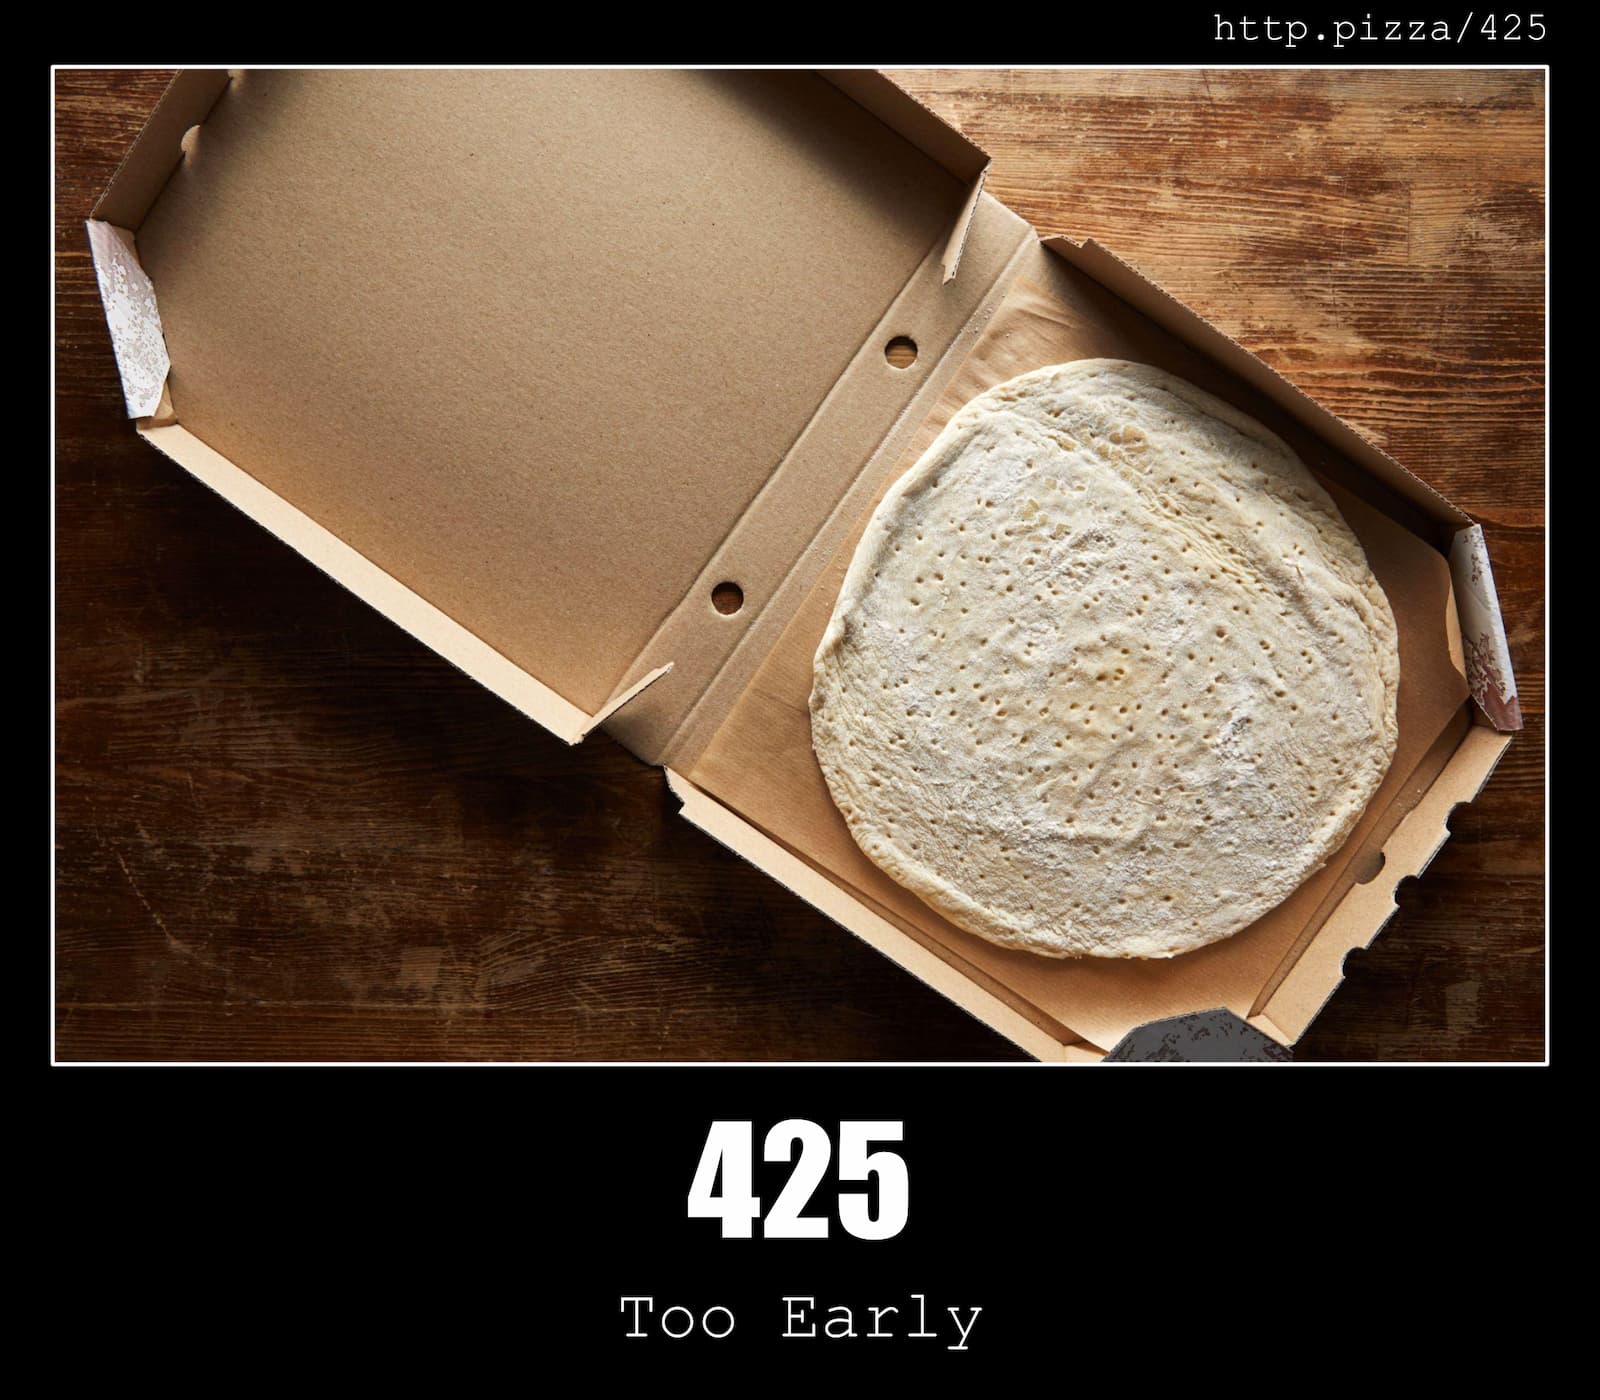 HTTP Status Code 425 Too Early & Pizzas